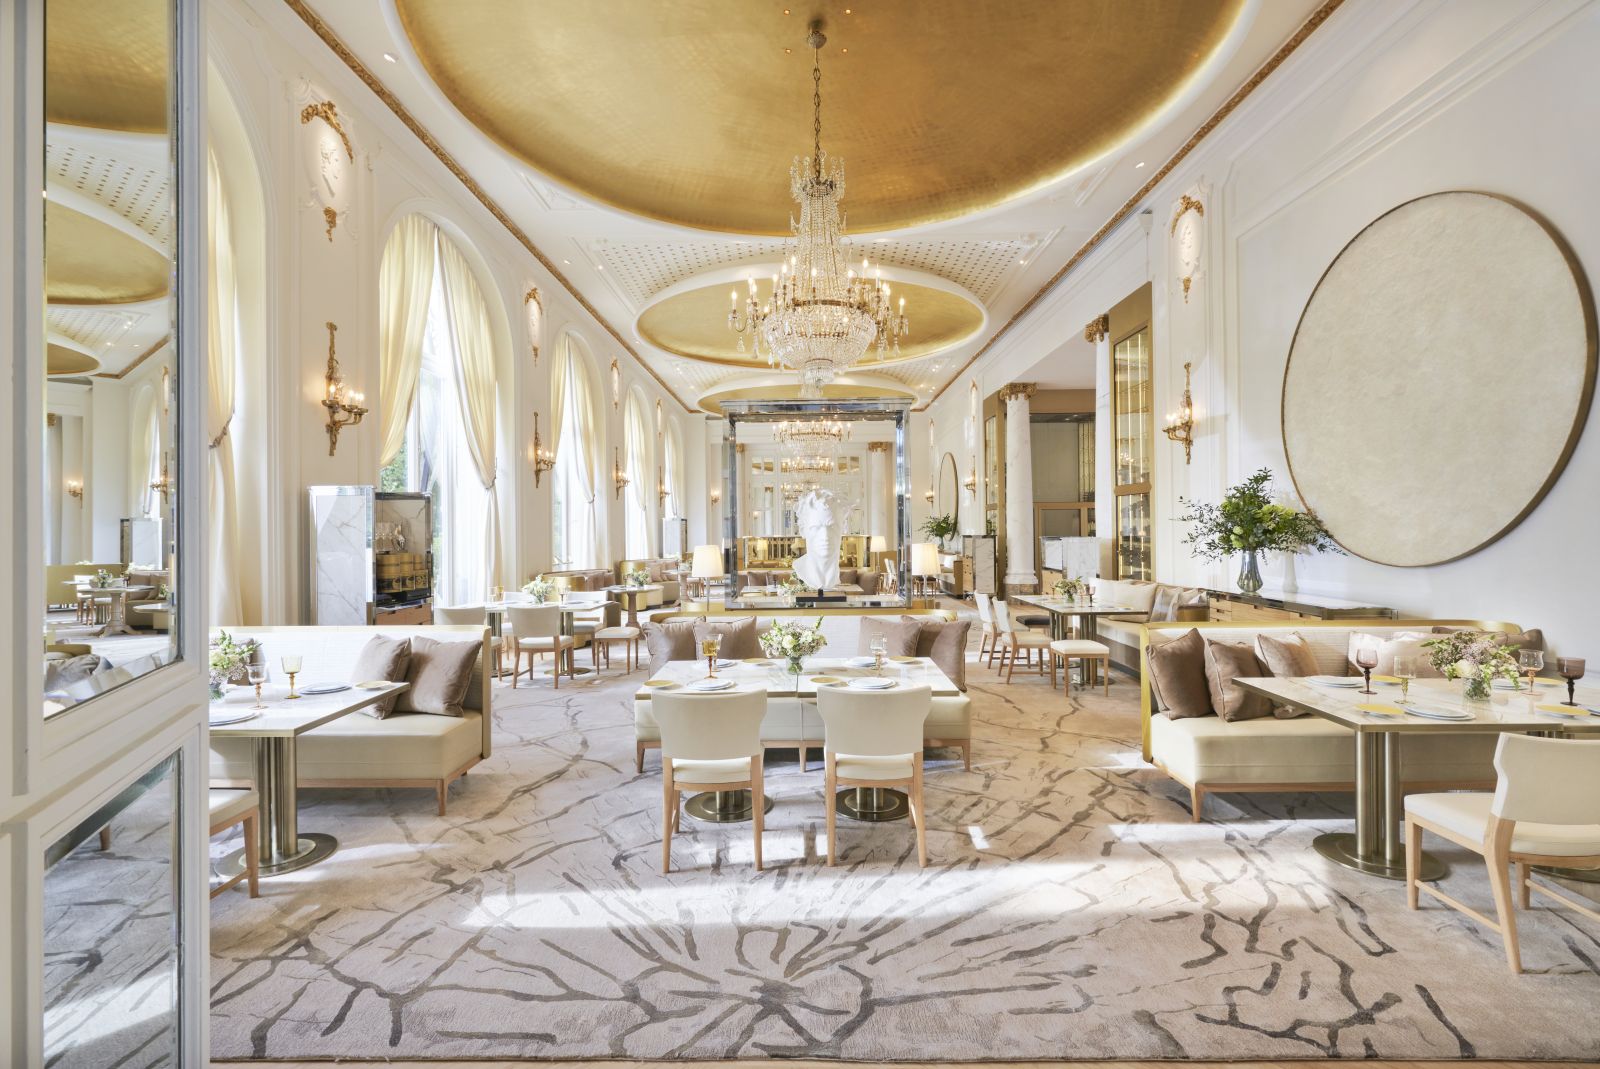 Dining area of Deessa Restaurant at luxury hotel Mandarin Oriental Ritz Madrid with floor to ceiling windows and a grande chandelier